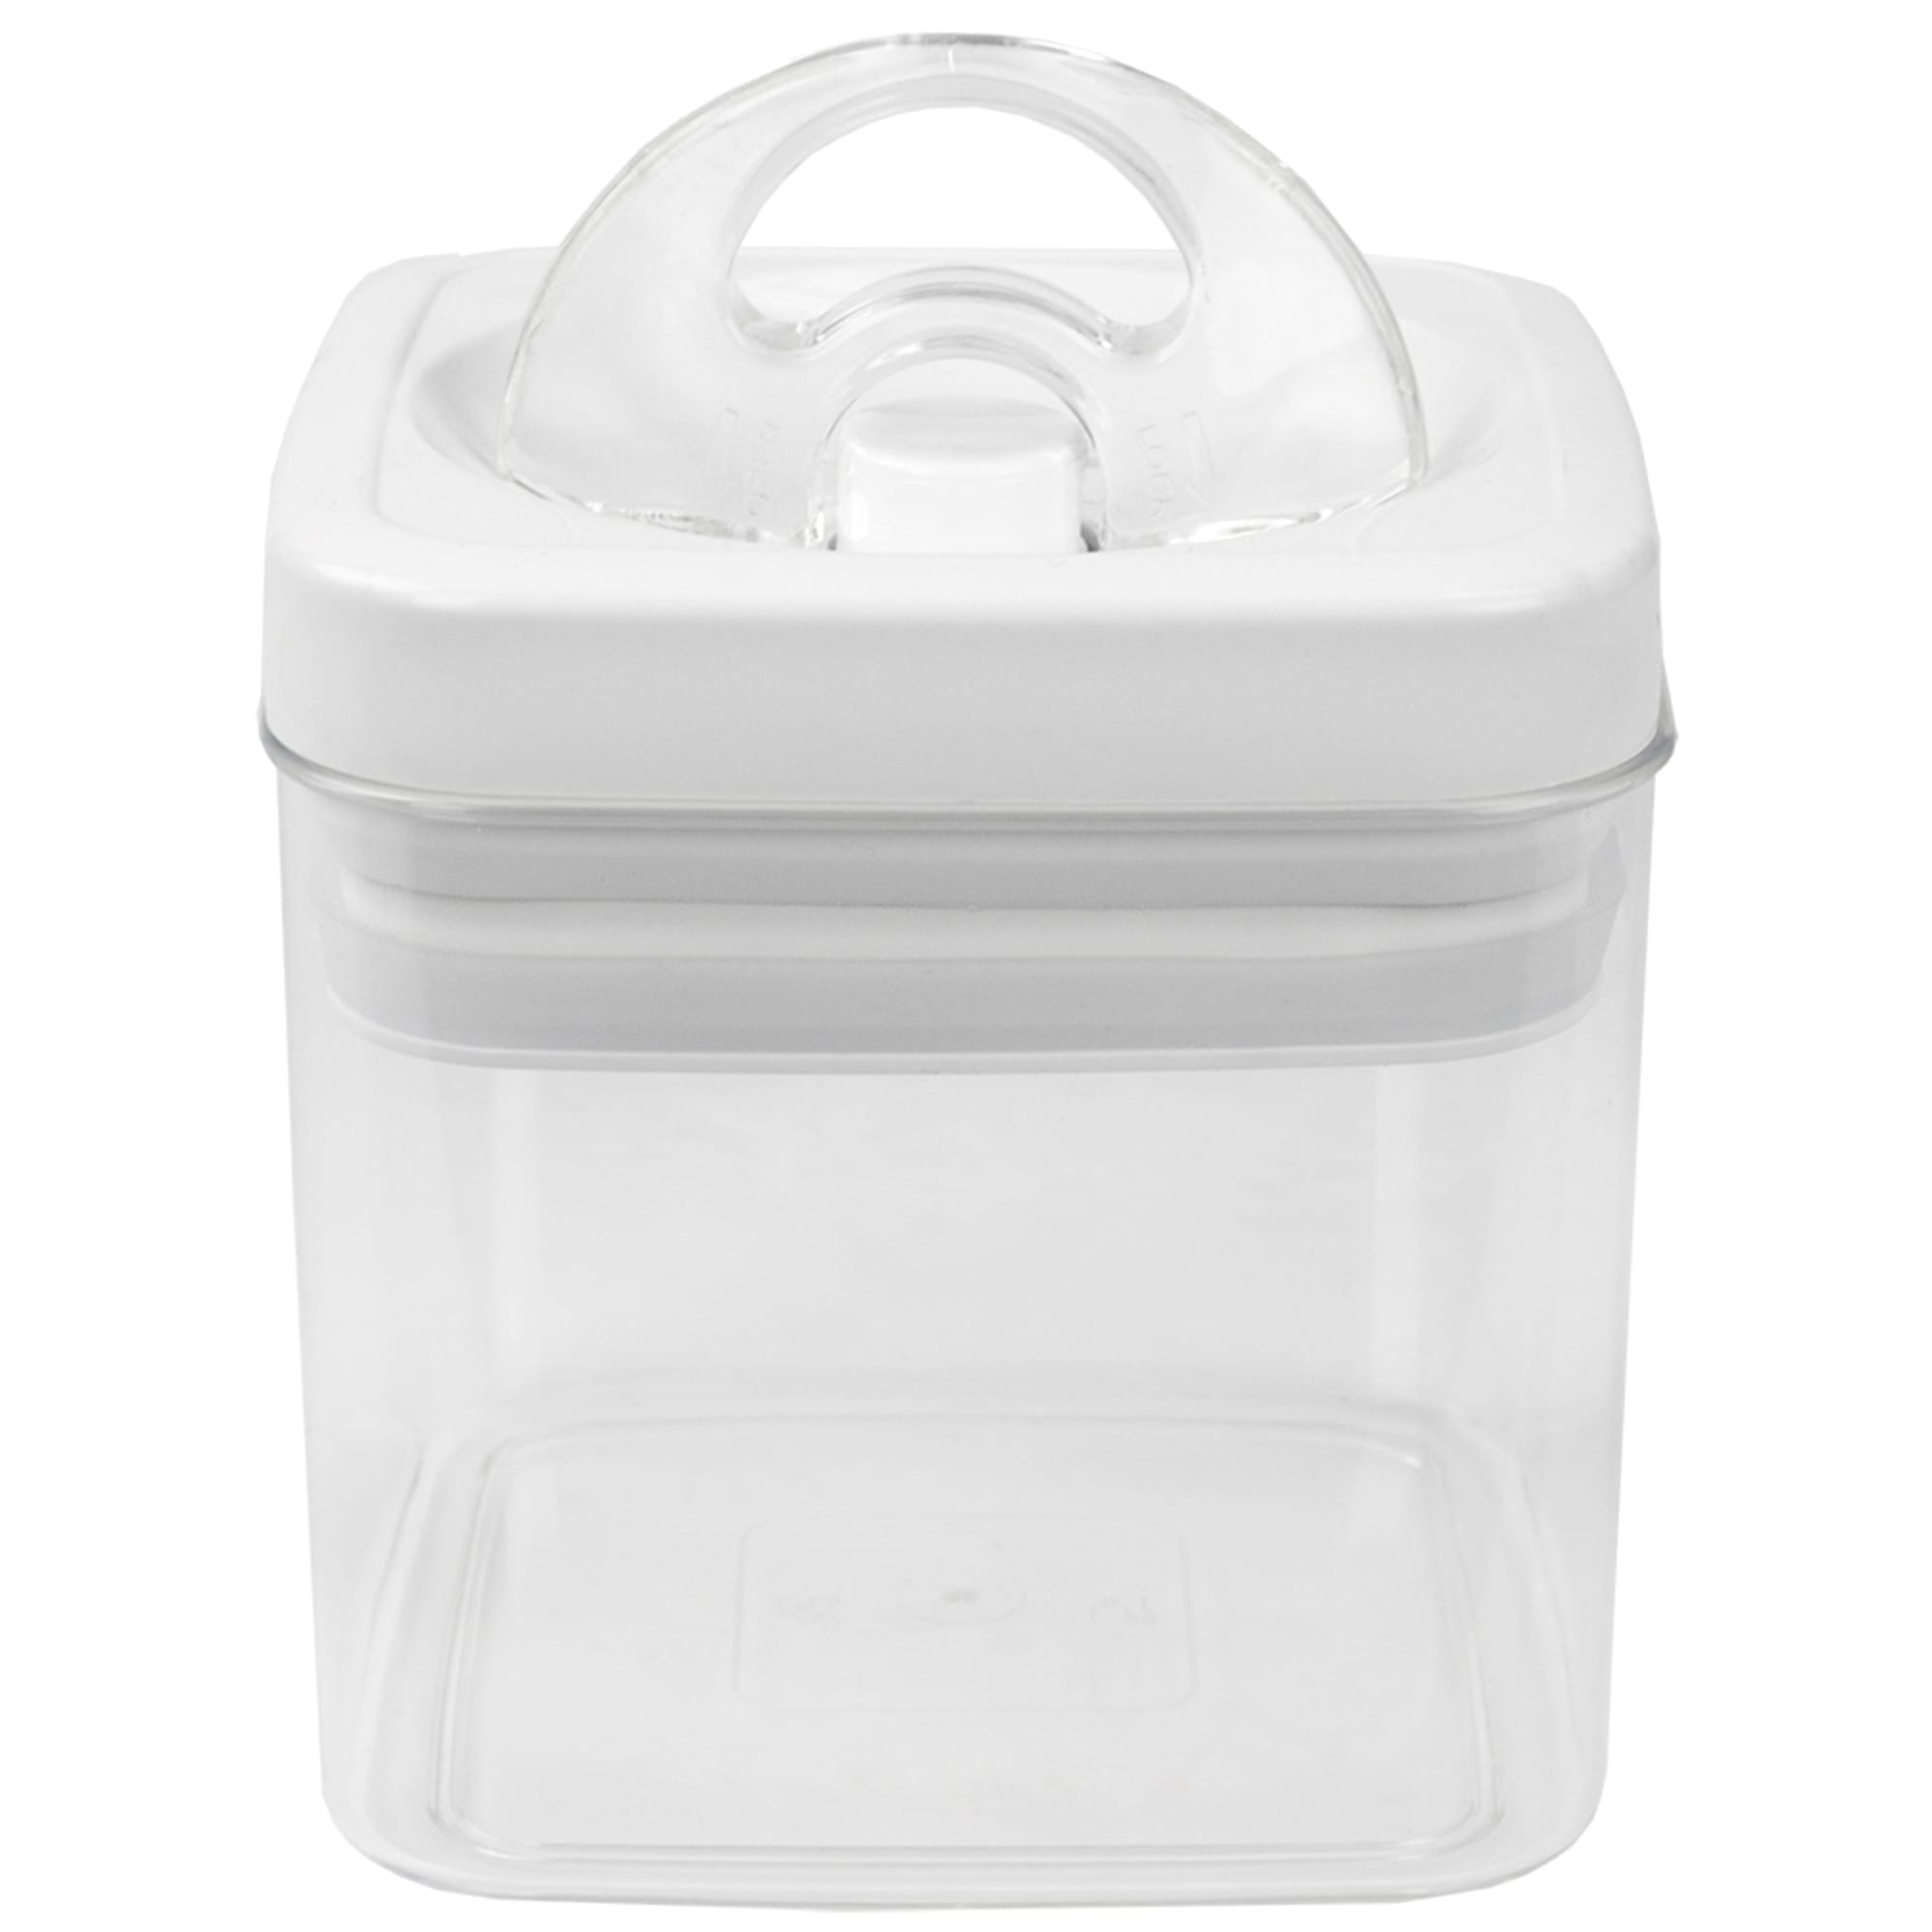 Home Basics 1 Liter Twist 'N Lock Air-Tight Square Plastic Canister, White $4.00 EACH, CASE PACK OF 6